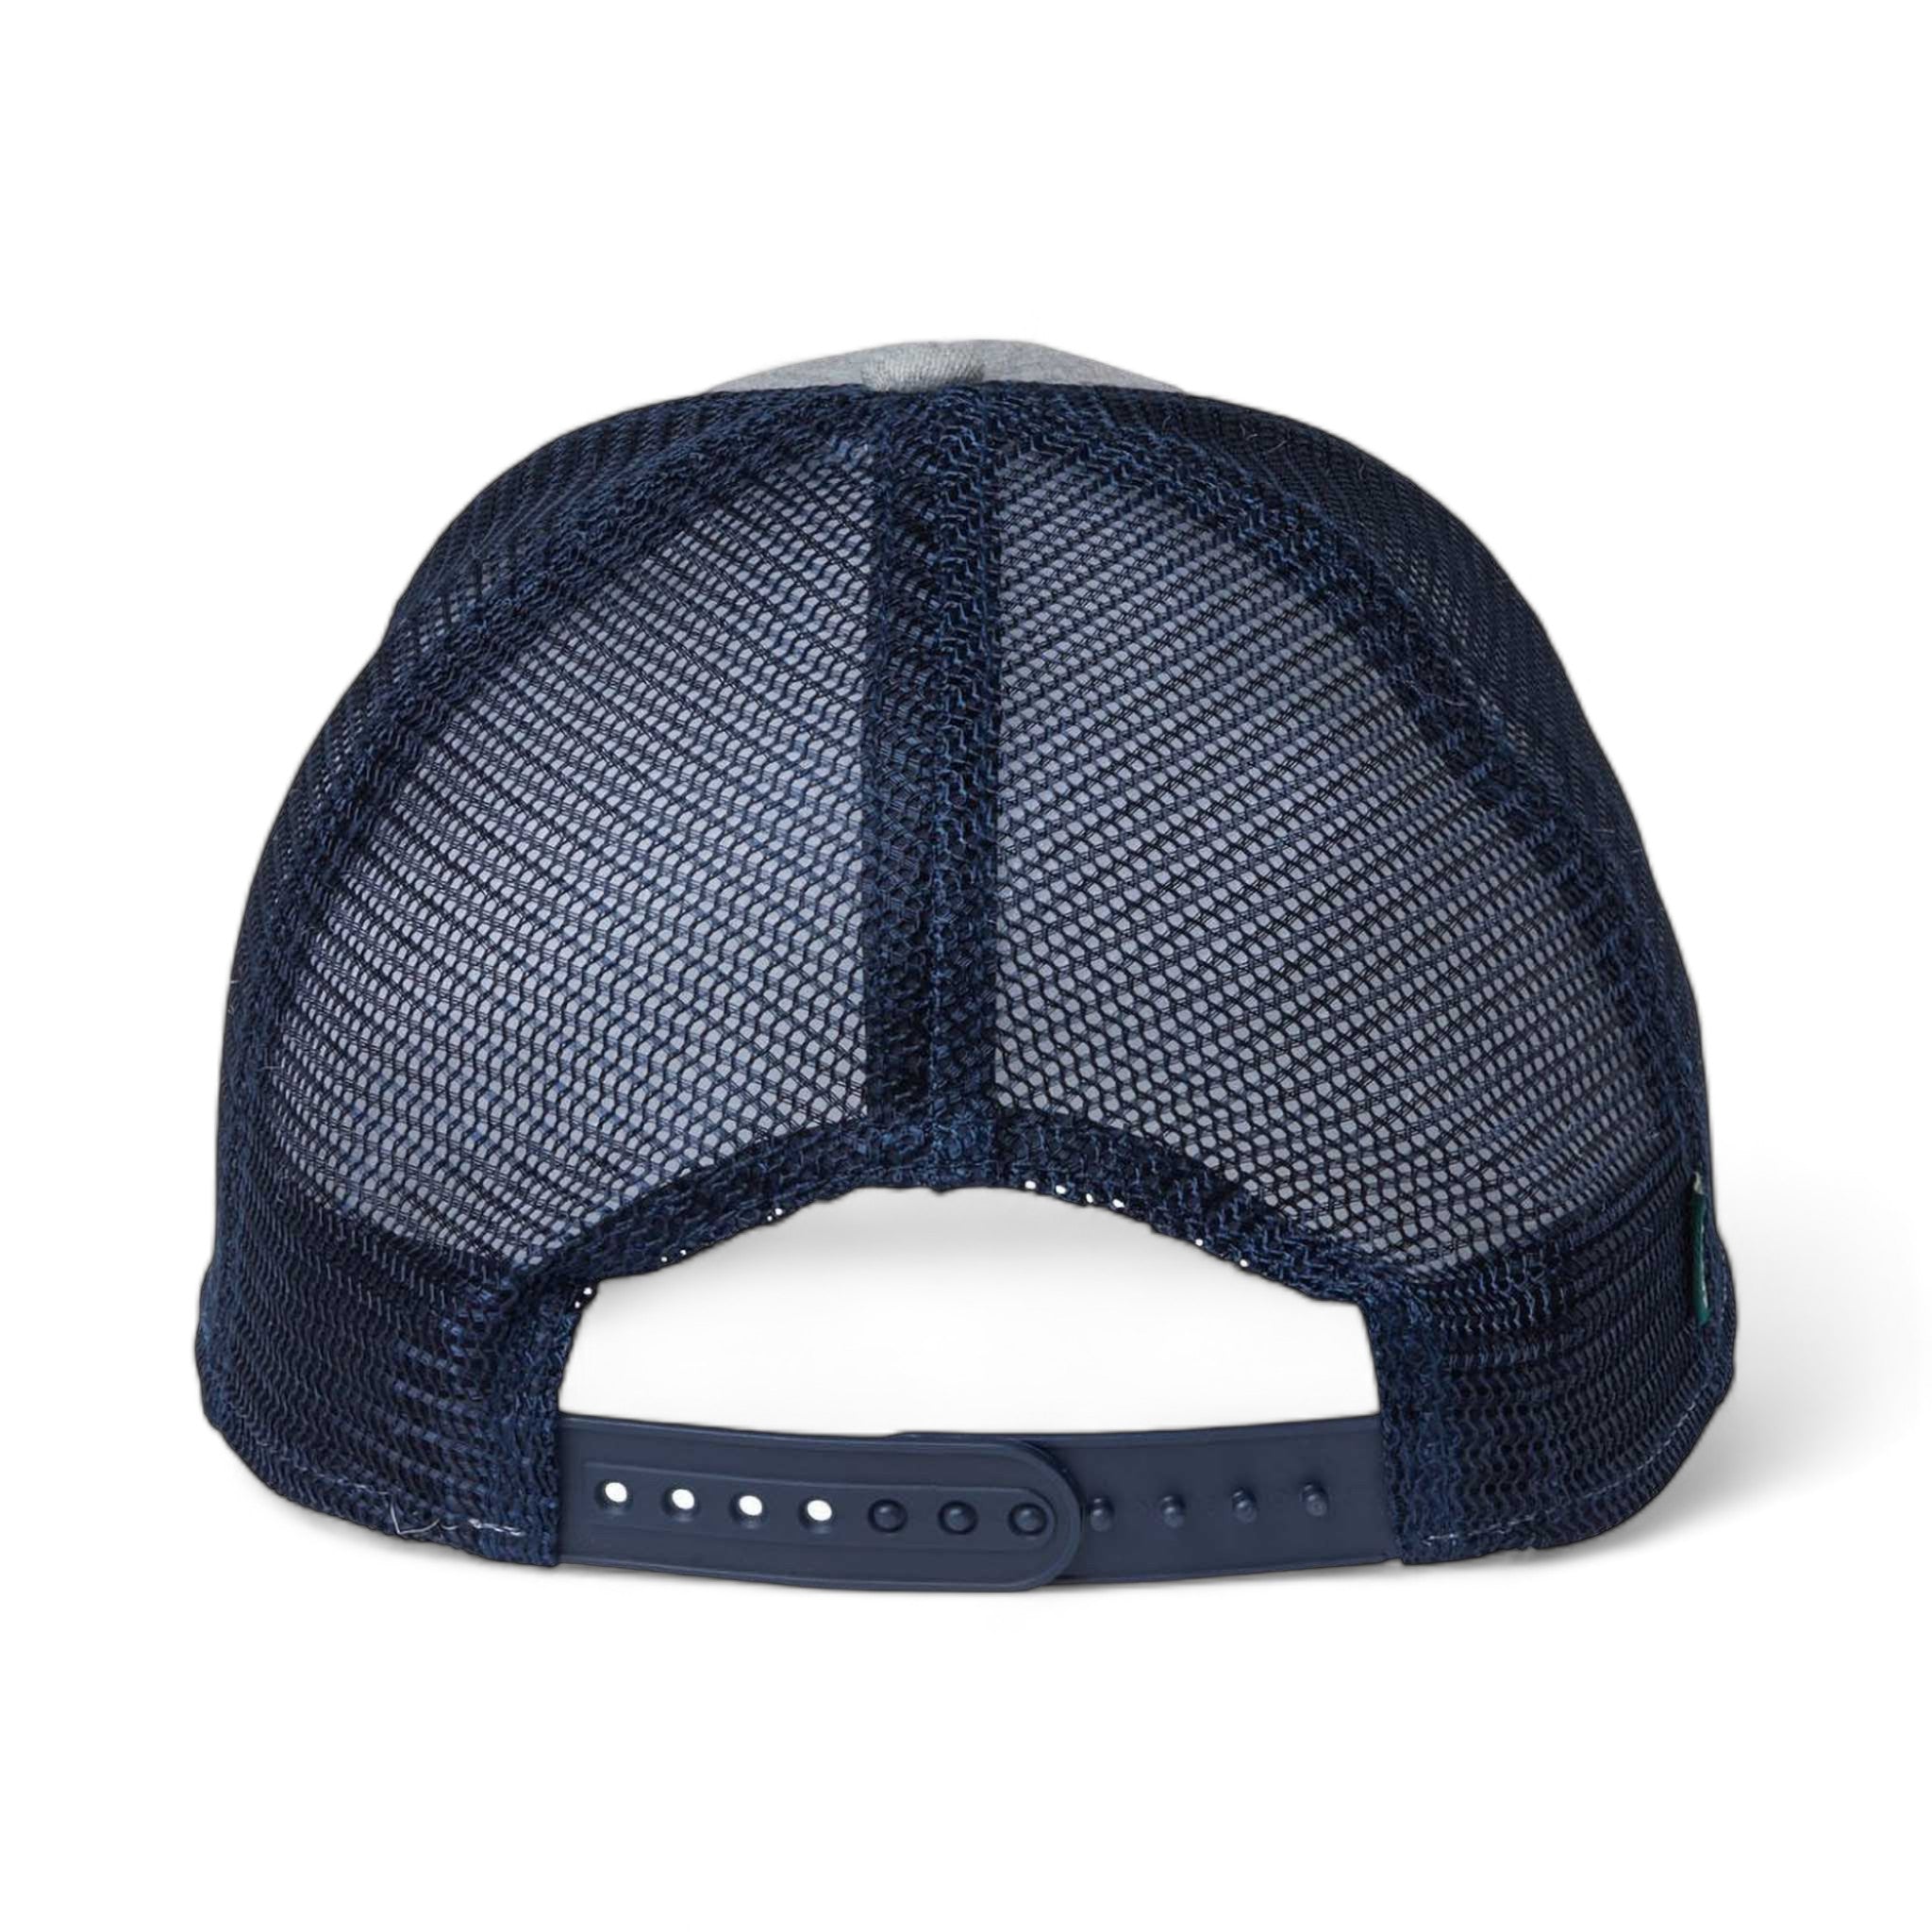 Back view of LEGACY LPS custom hat in heather grey and navy